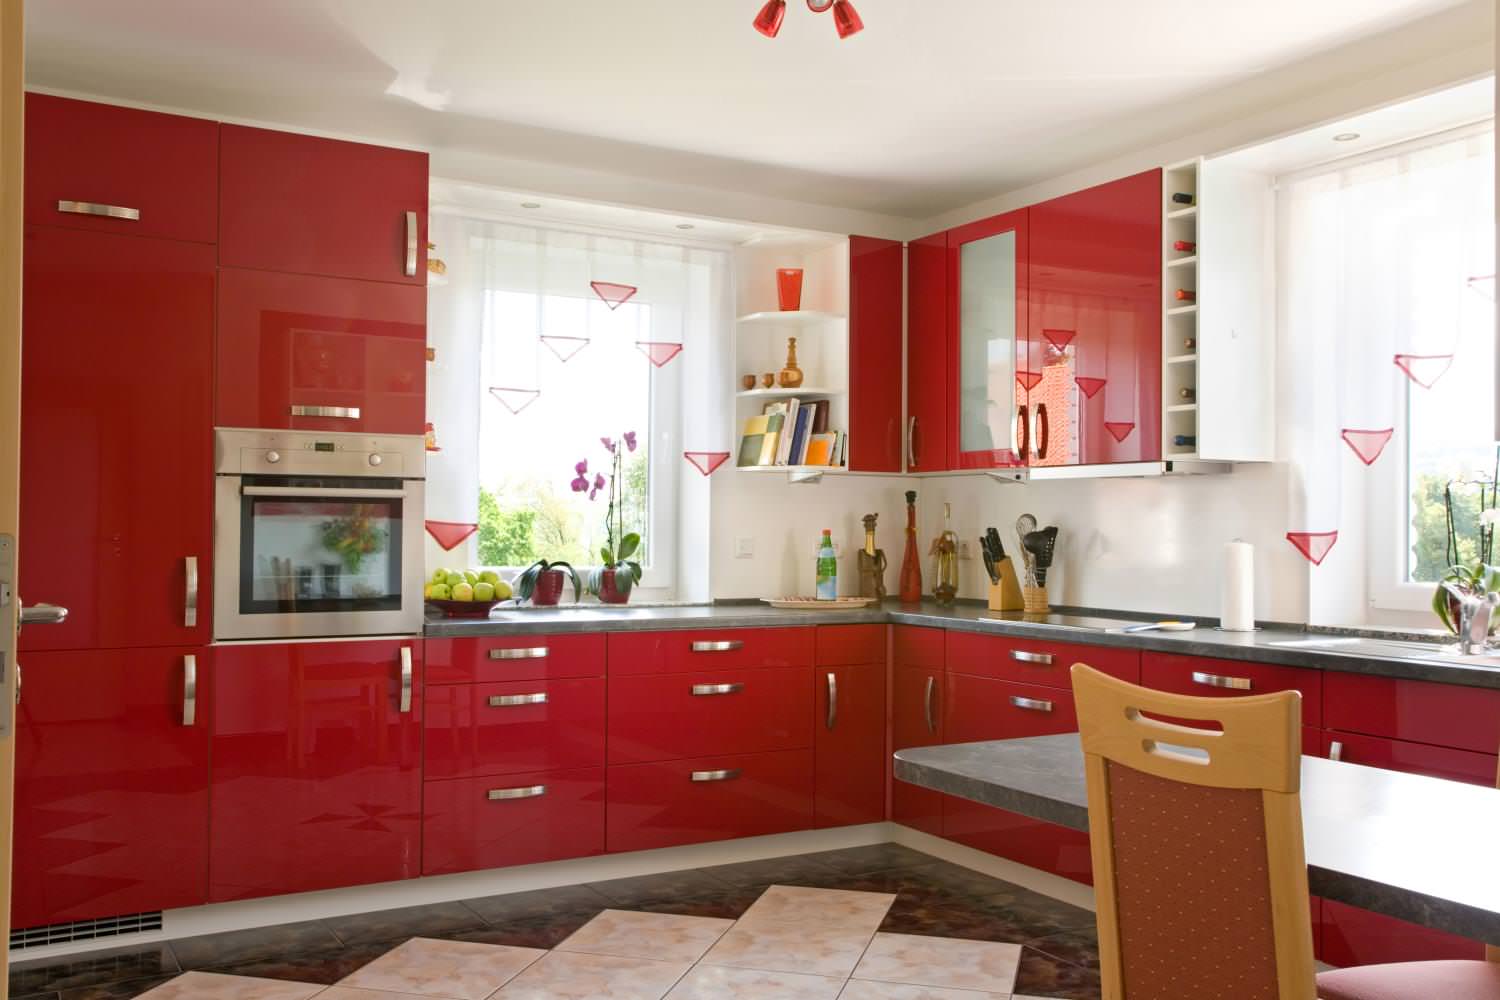 A Mid-Century Kitchen in Red